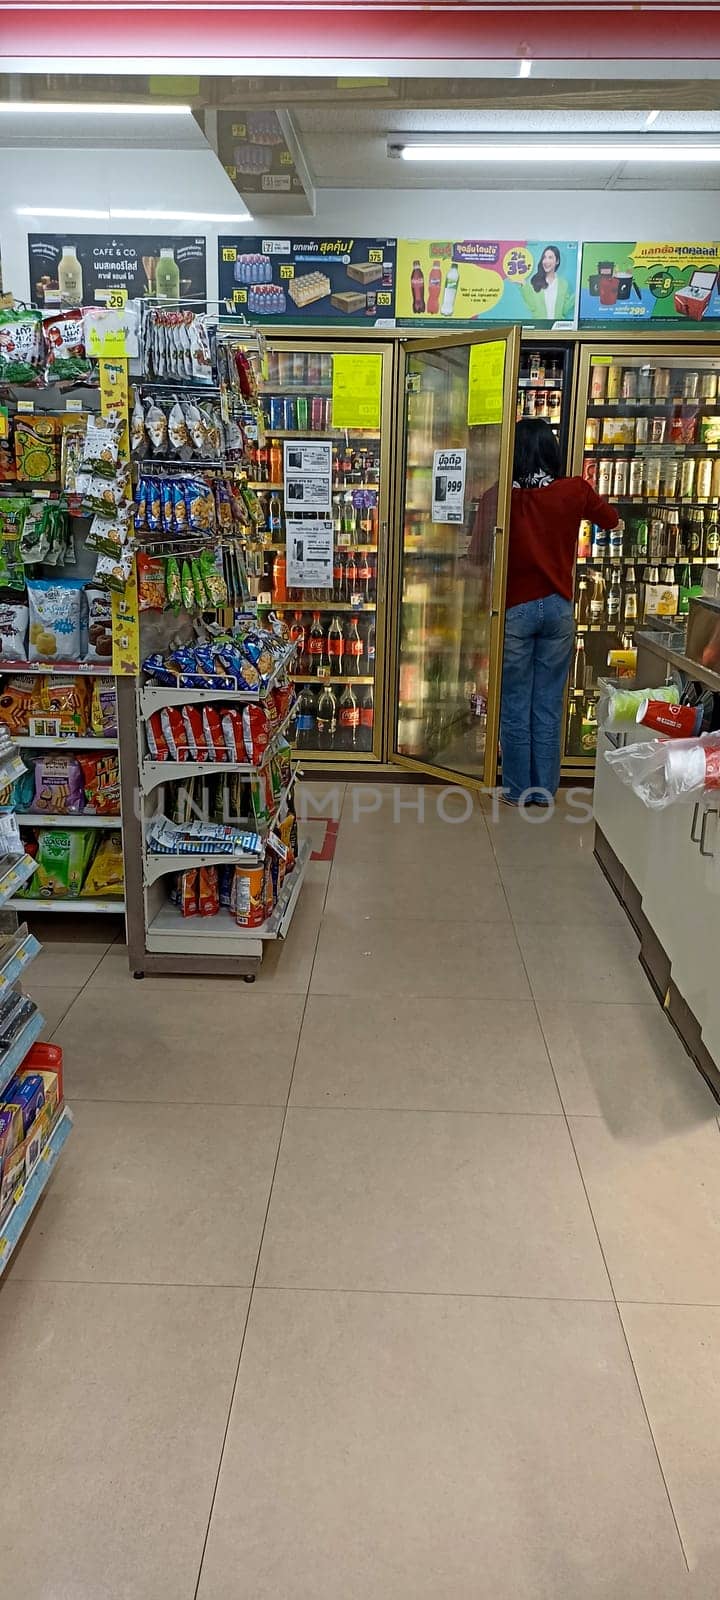 25-8-2022 Chonburi Thailand Convenience Store It is very popular, especially at 7/11. by boonruen